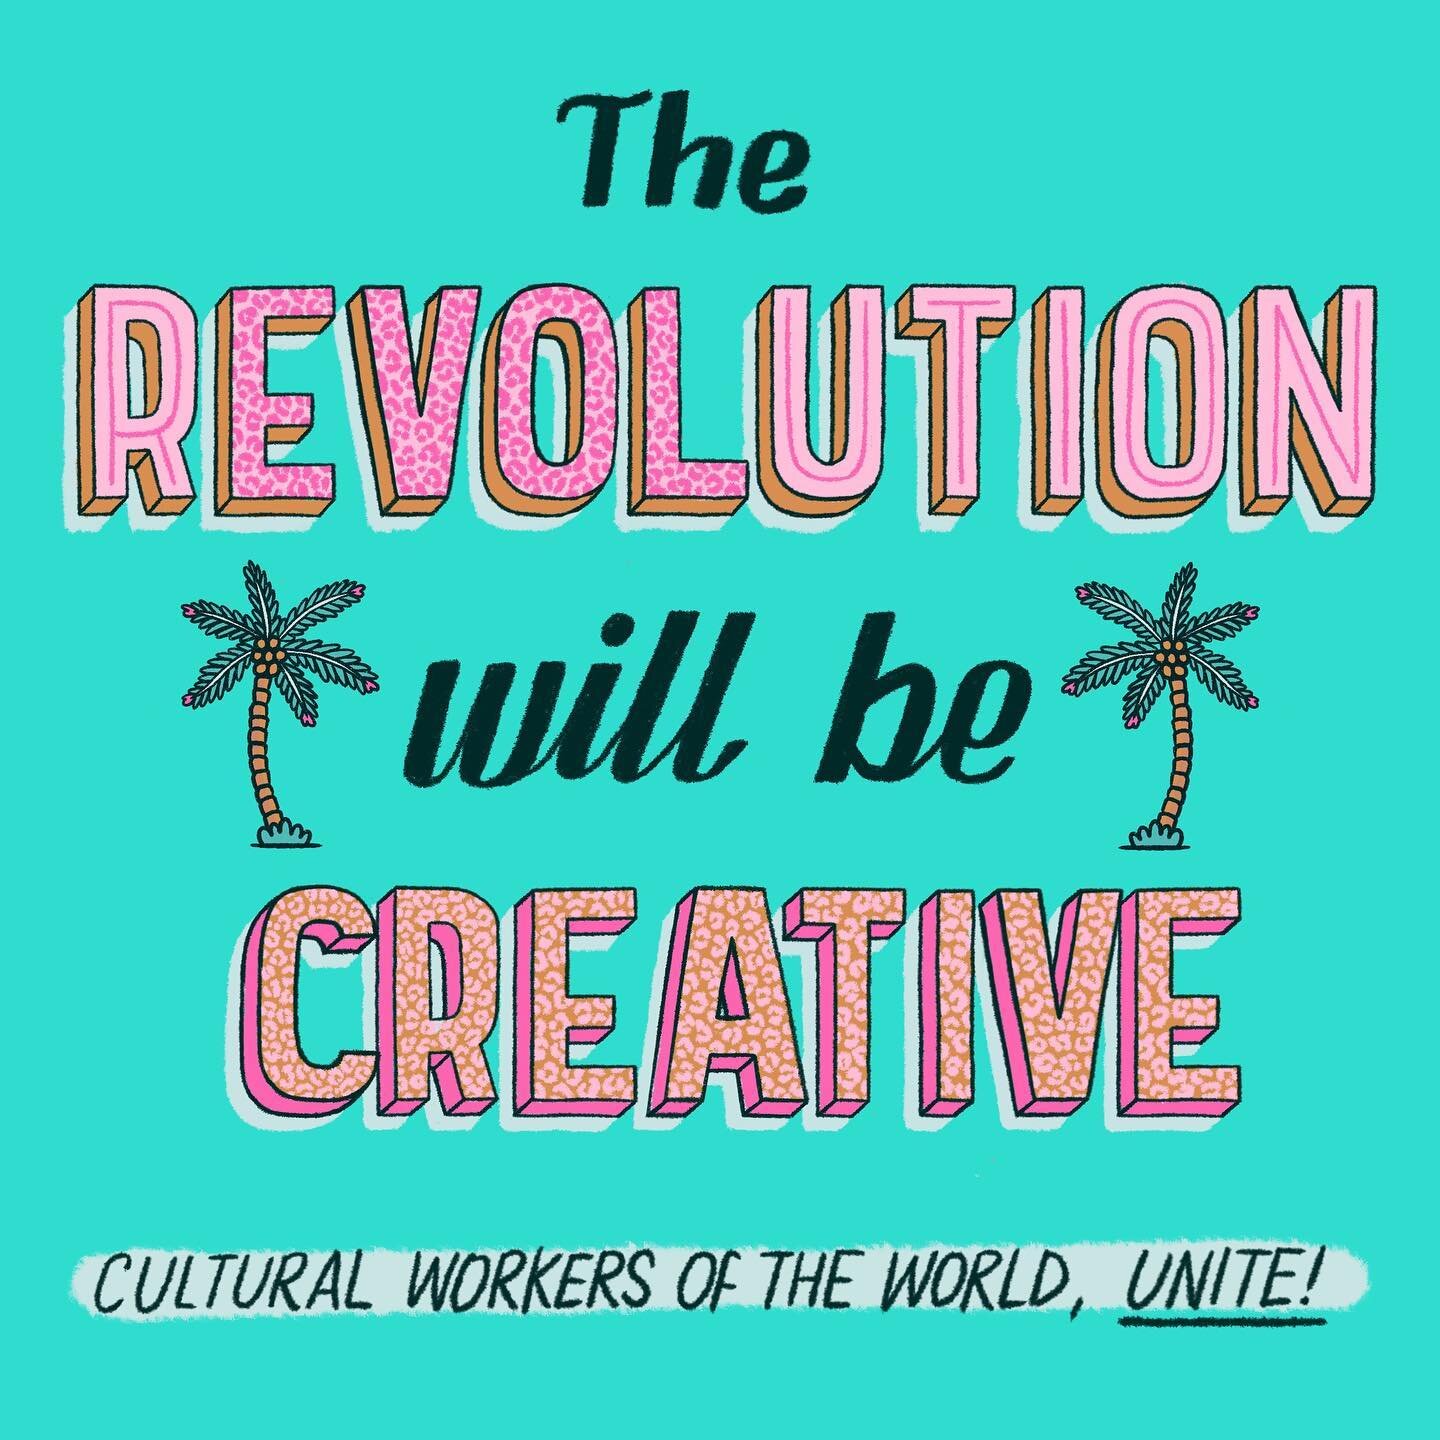 Happy May Day Baes 🌴✨

The revolution will be creative. Cultural workers of the world, unite!

#MayDay #WorkersOfTheWorldUnite #CulturalWorkers #Revolution #RevolutionIsLove #TheRevolutionWillBeCreative #Creative #ArtActivism #Artivism #Unite #Strik